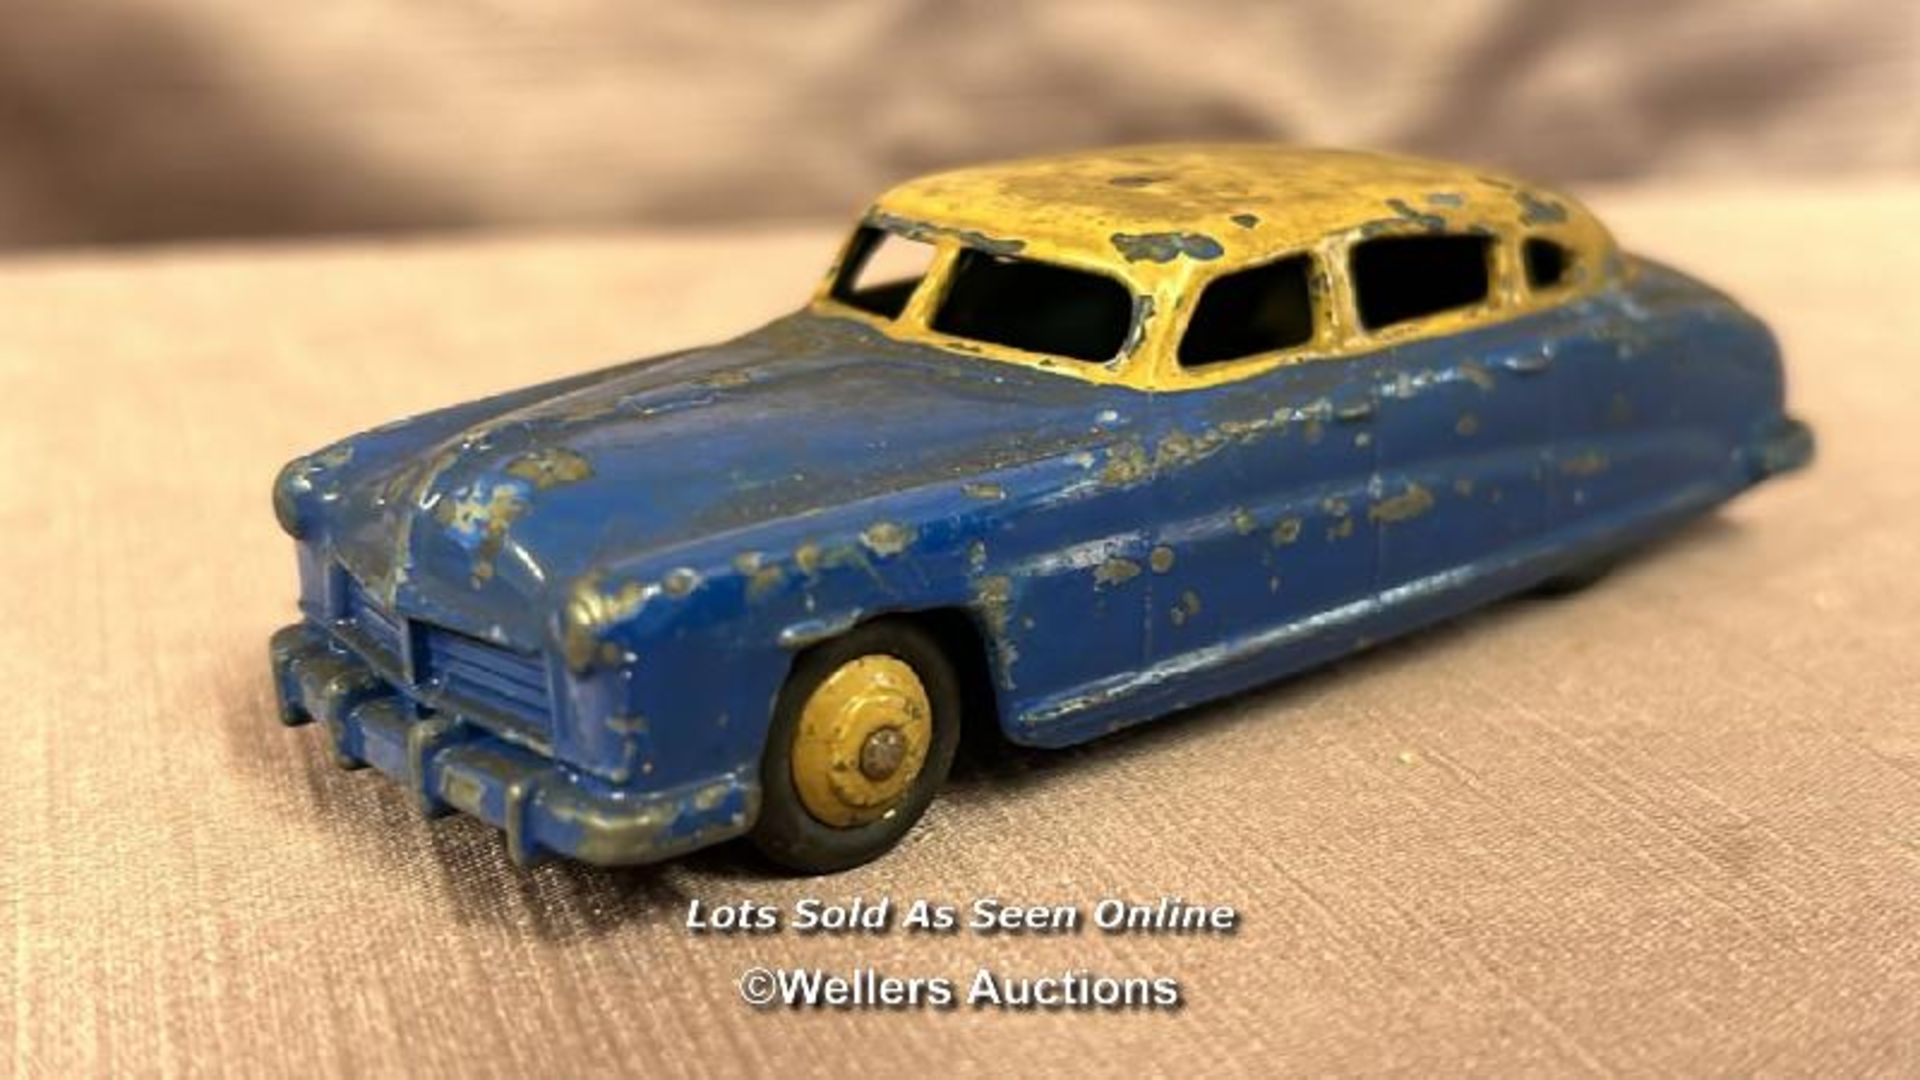 TWO DINKY HUDSON SEDAN DIE CAST CARS, ONE BLUE AND ONE CREAM - Image 4 of 5